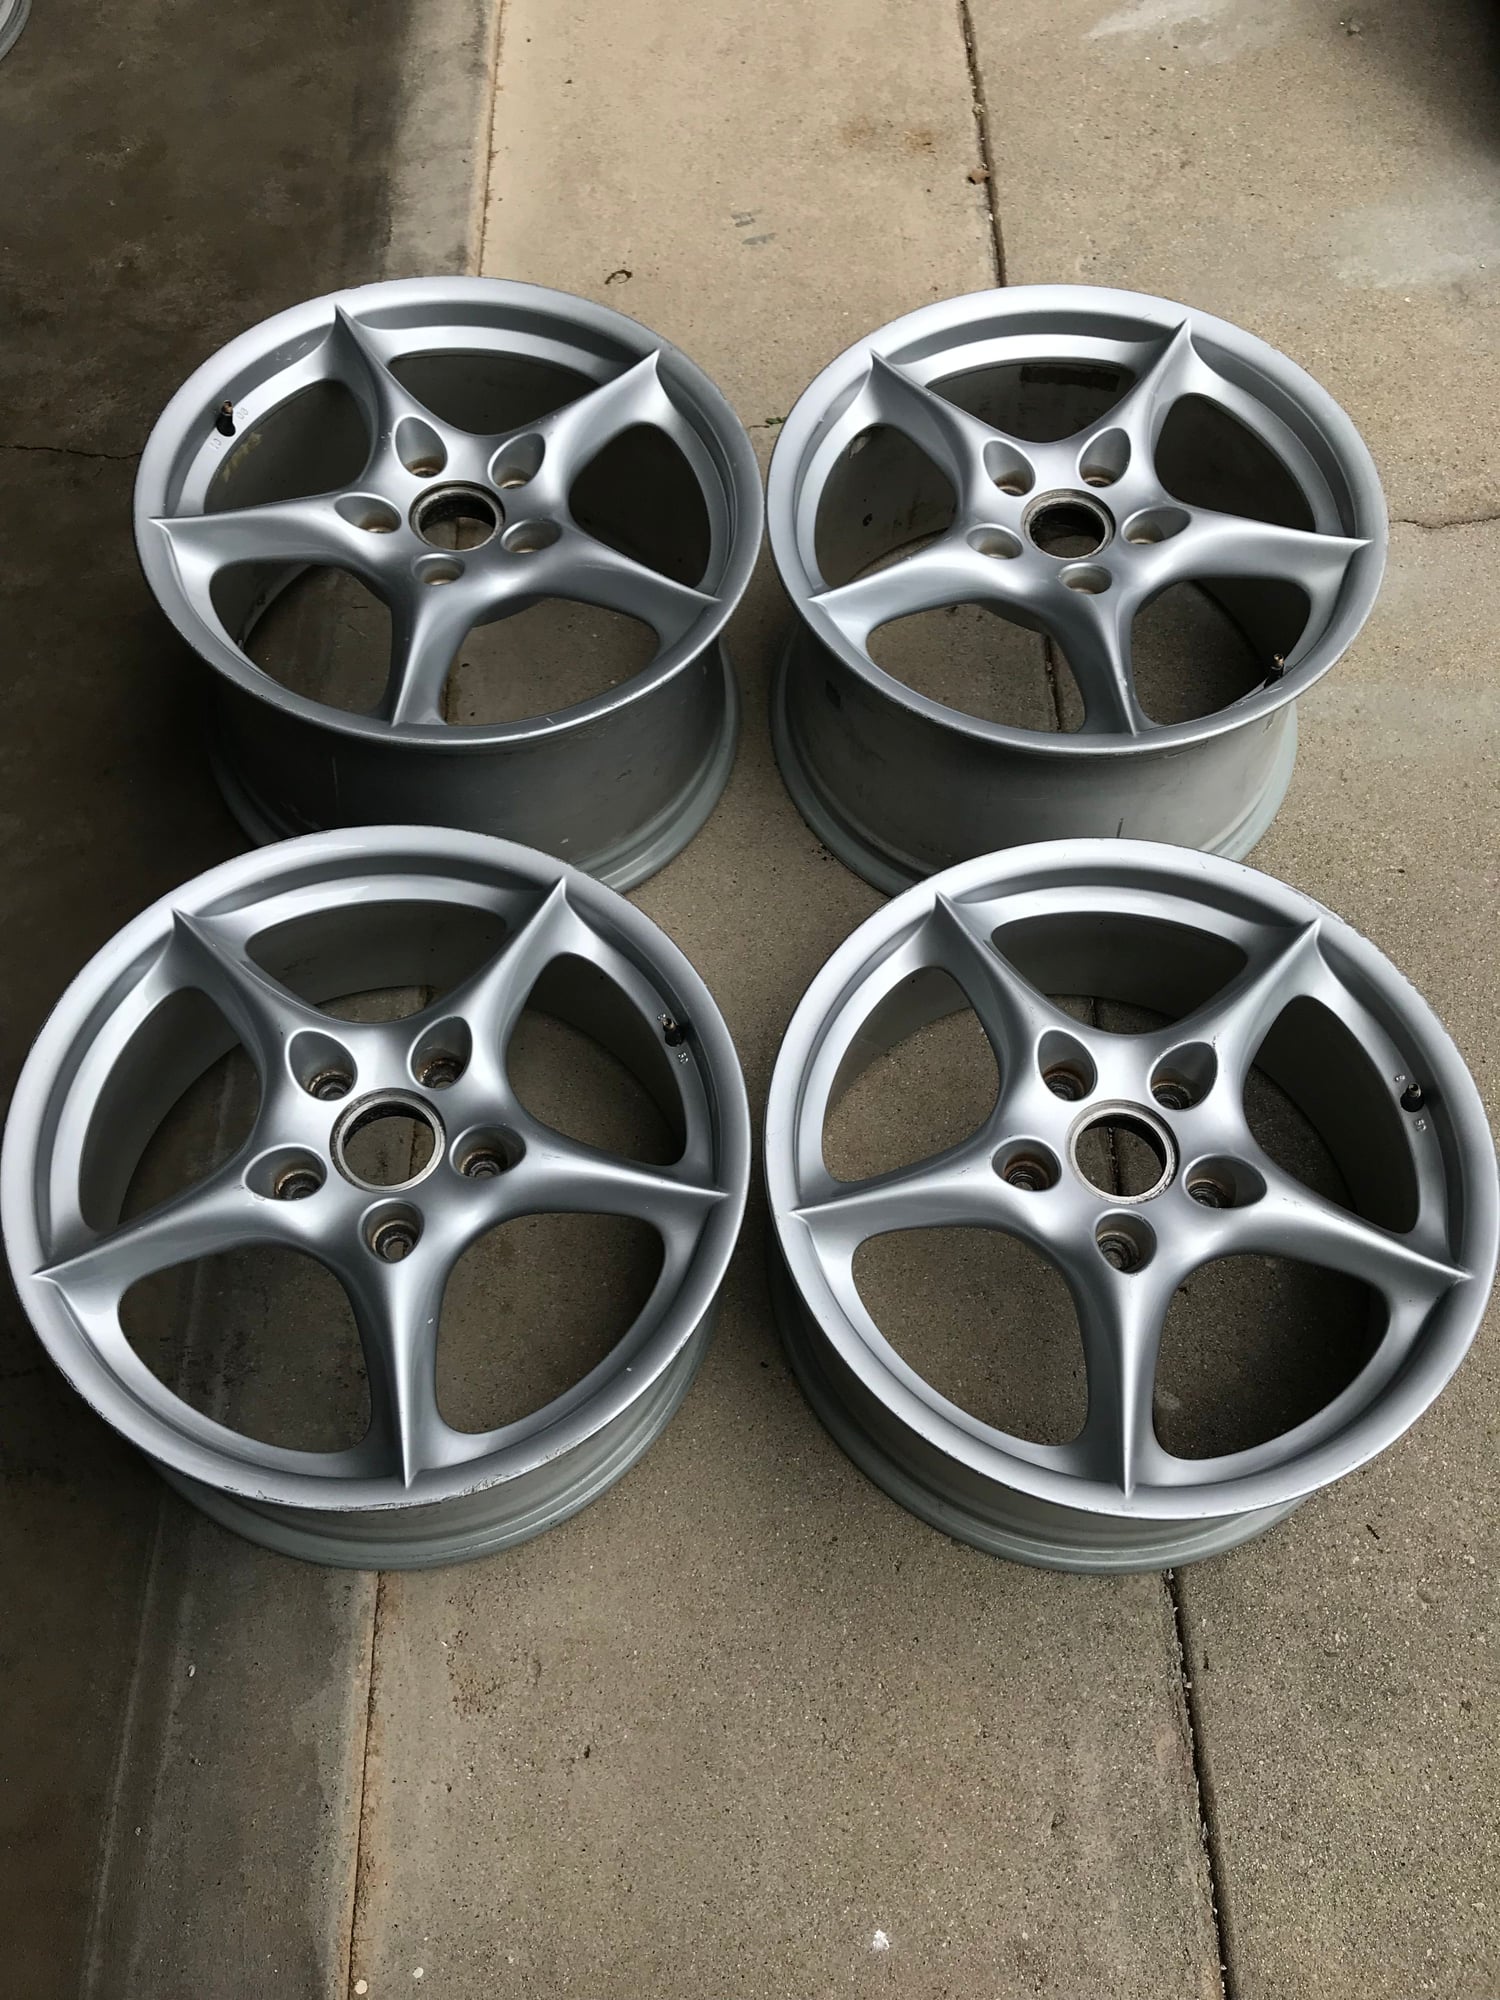 Wheels and Tires/Axles - FS: 18x8 18x10 "MY02" bbs wheels. - Used - All Years Porsche 911 - Redlands, CA 92373, United States